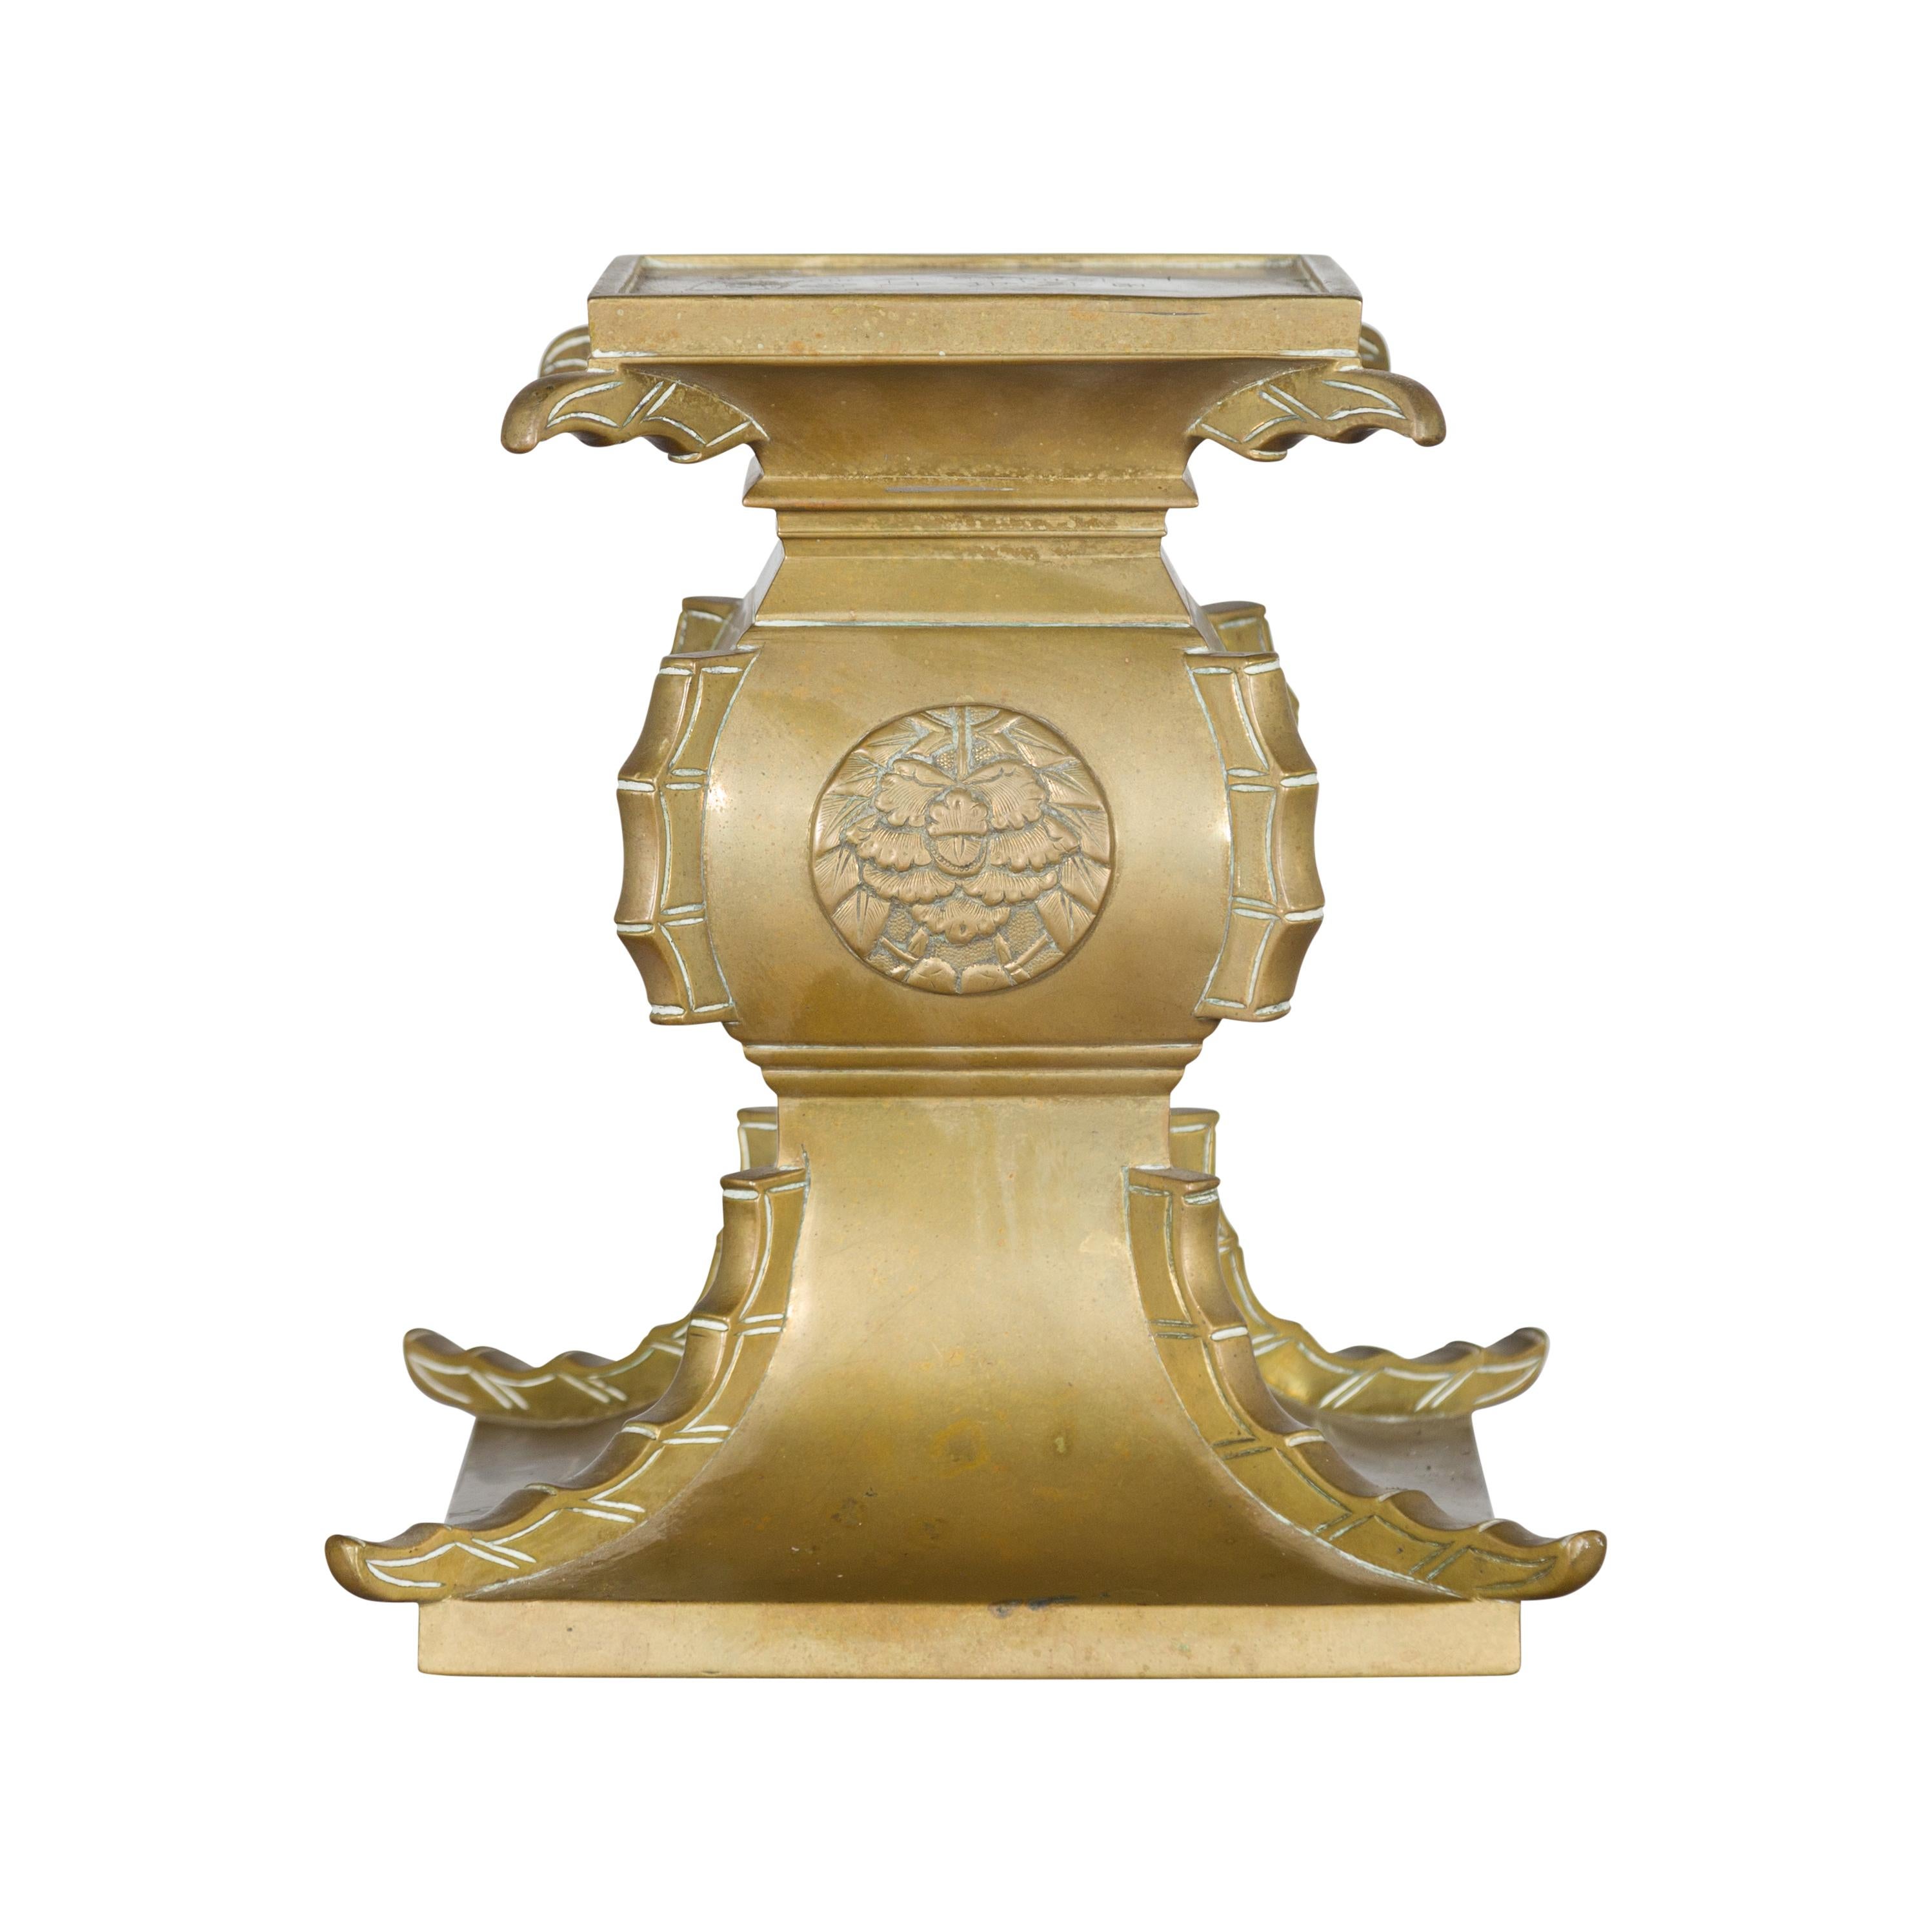 A Japanese Meiji period antique brass square top candle holder from the early 20th century, with intricate carved medallion, calligraphic inscription and ornate base. Created in Japan during the Meiji period in the early years of the 20th century,